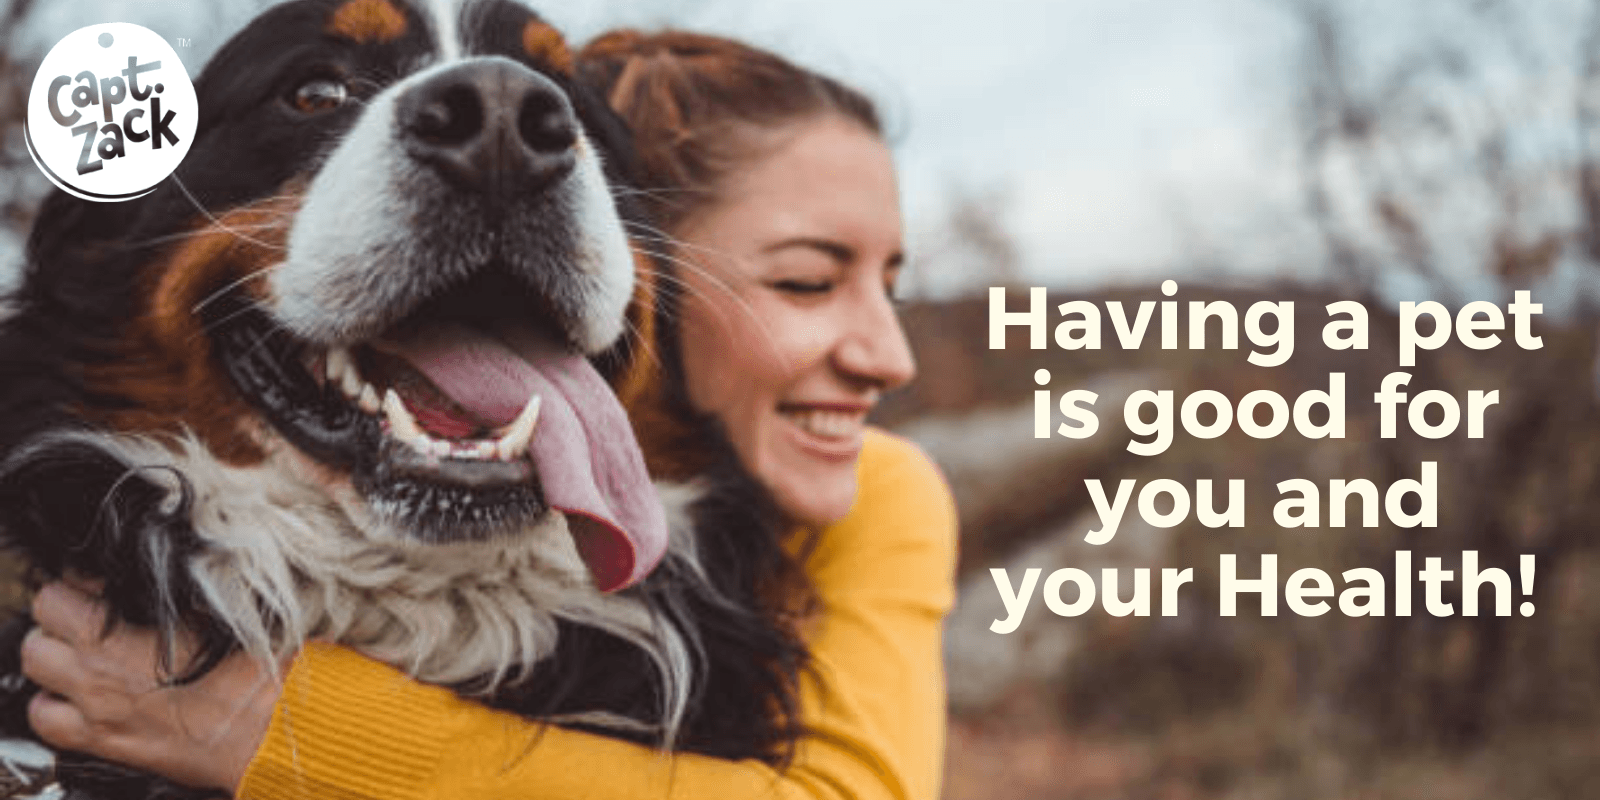 Having a pet is good for you and your Health!